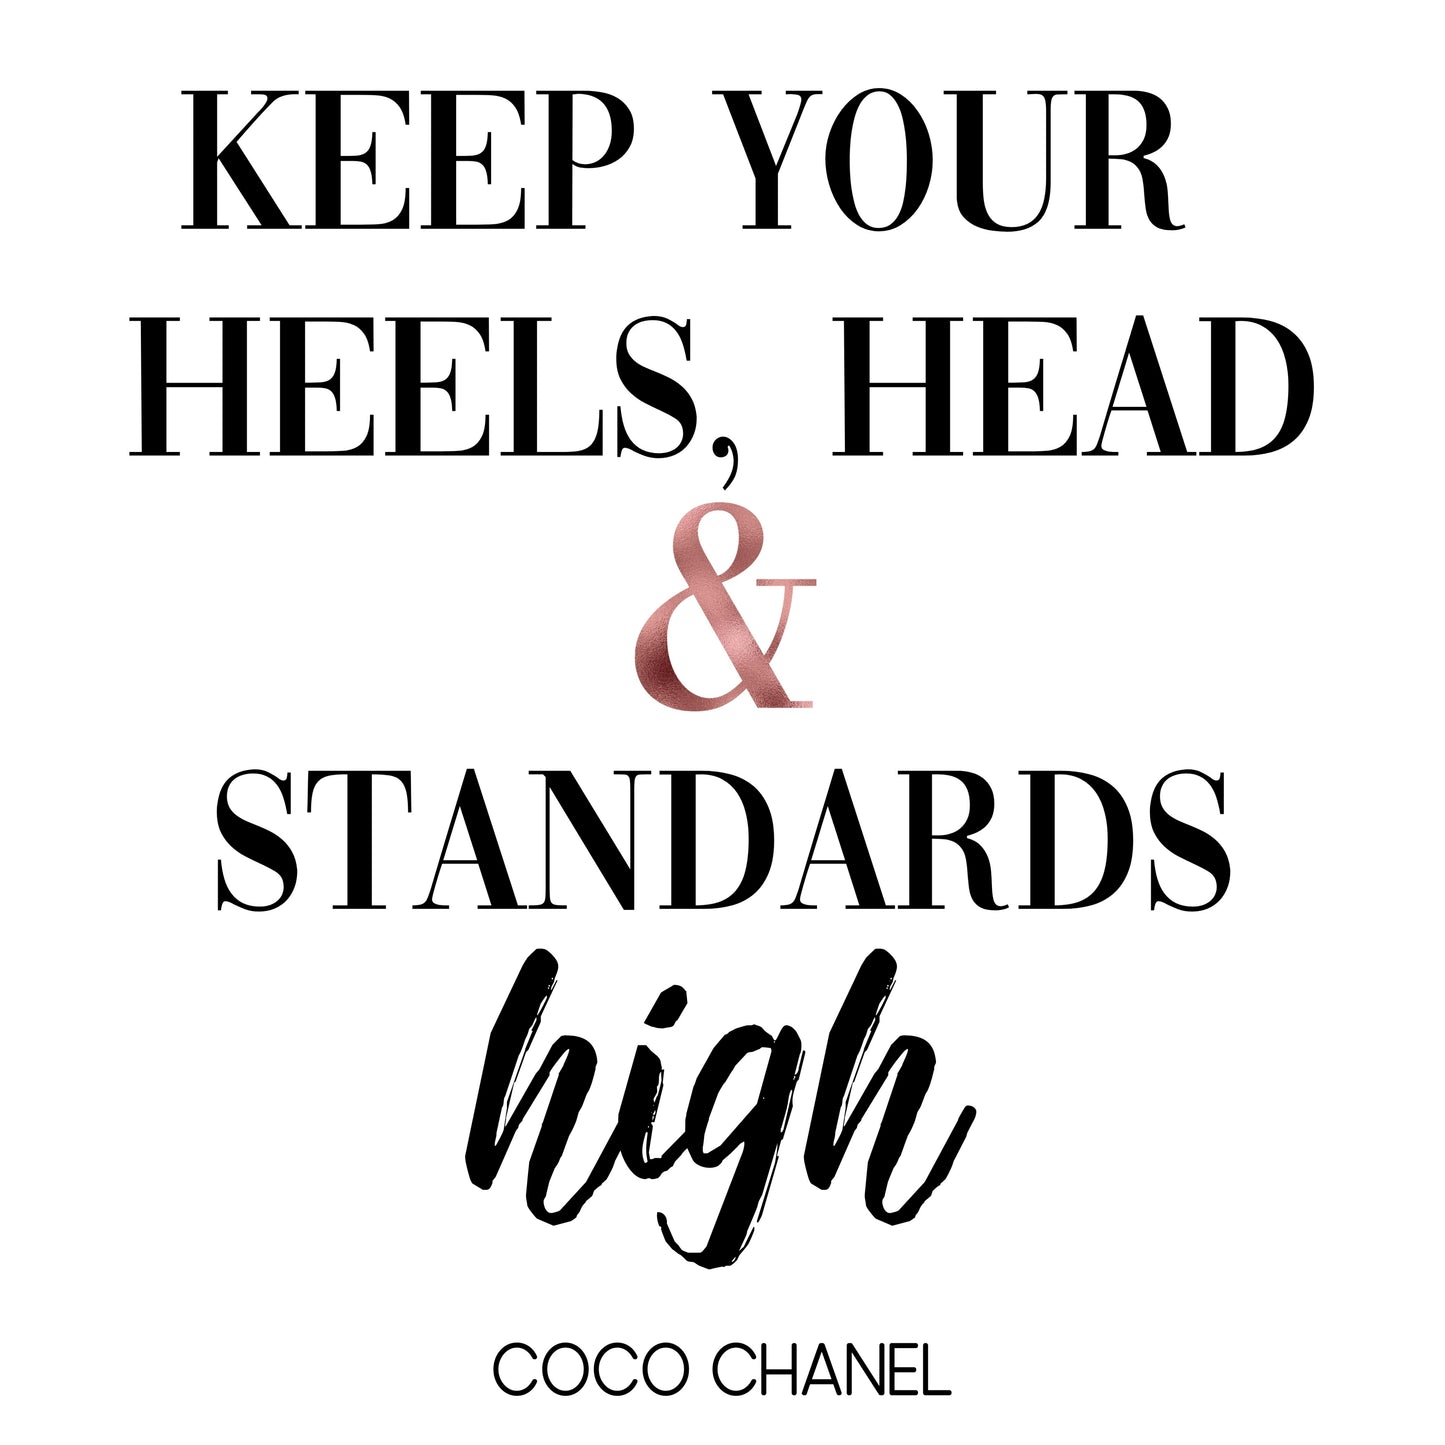 "Keep Your Heels, Head & Standards High," Famous Quote by Coco Chanel With Rose Gold Accent, Printable Art